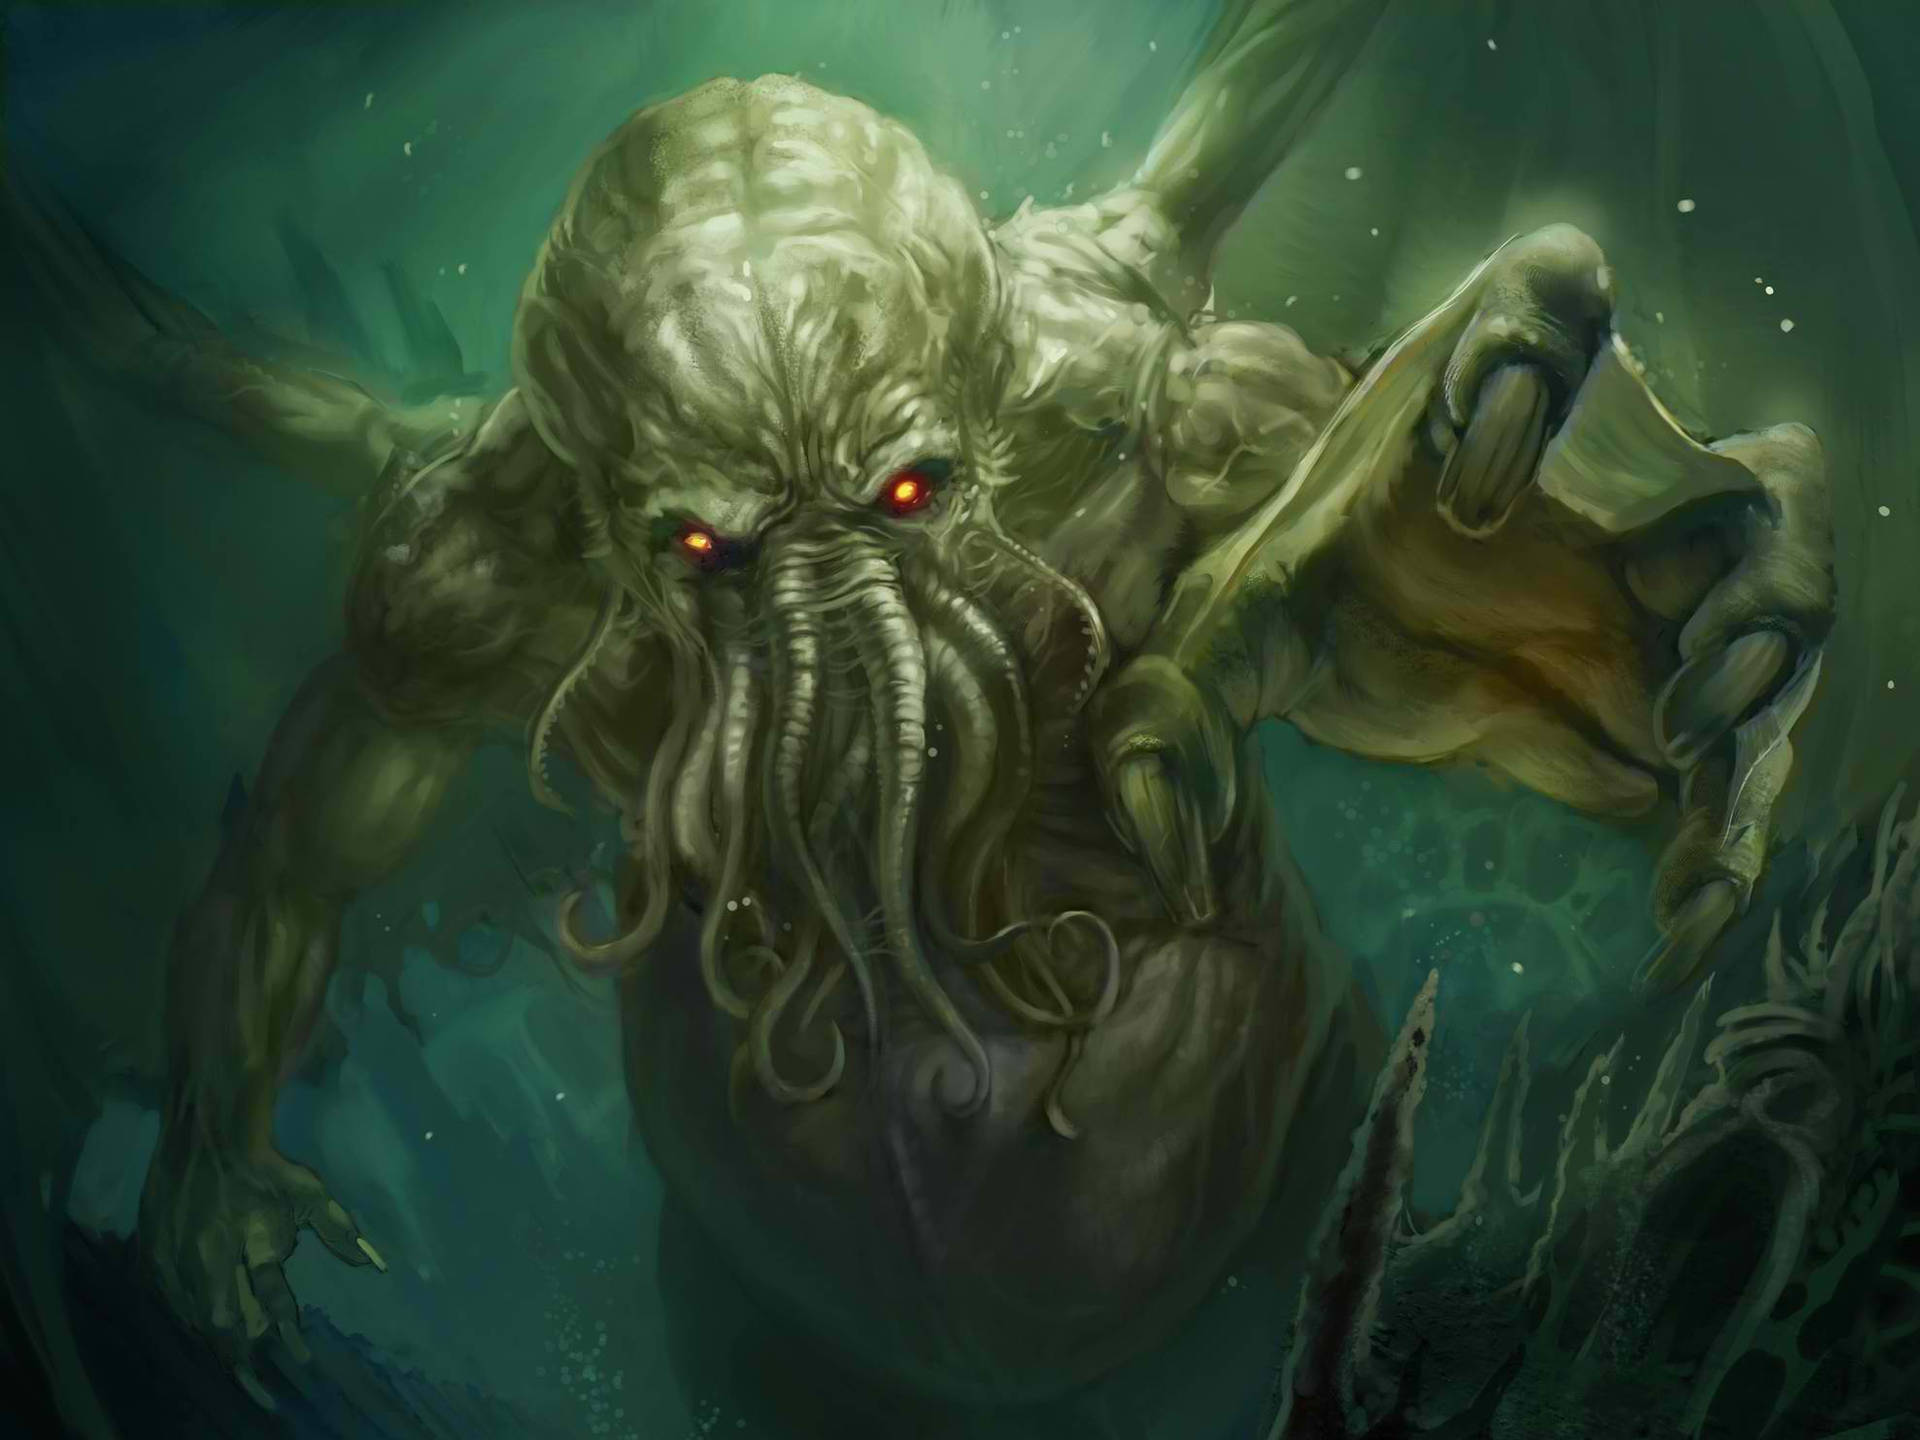 Underwater encounter with Cthulhu Wallpaper